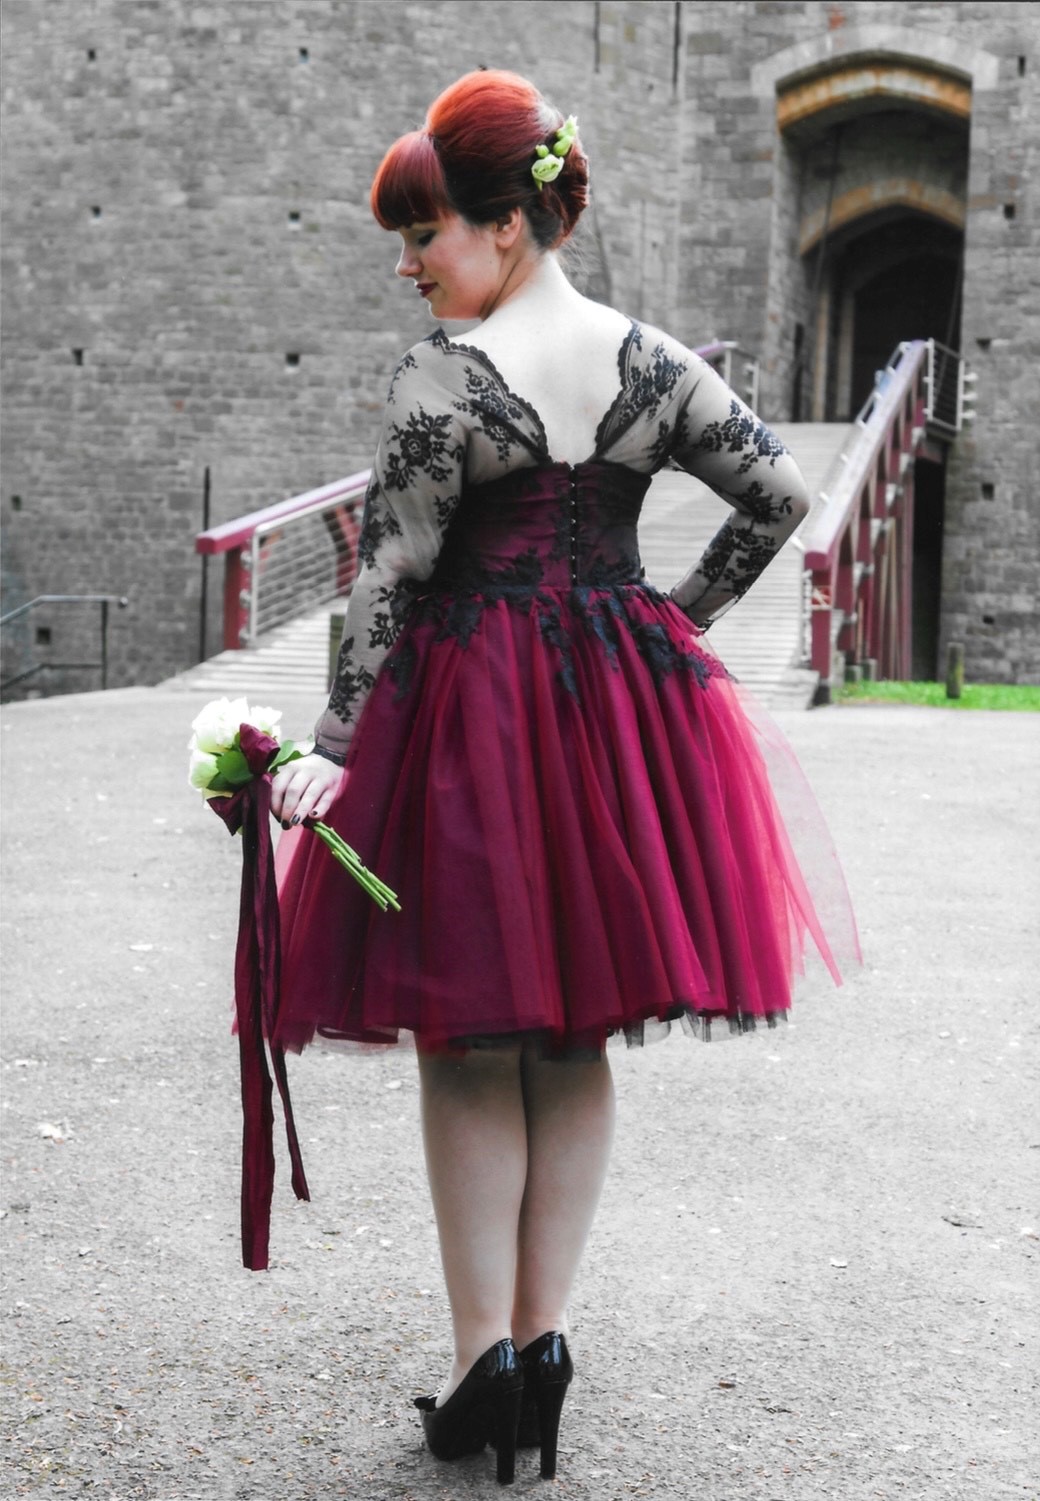 Black and Red, vintage inspired tea dress, by Tabitha Alice Designs